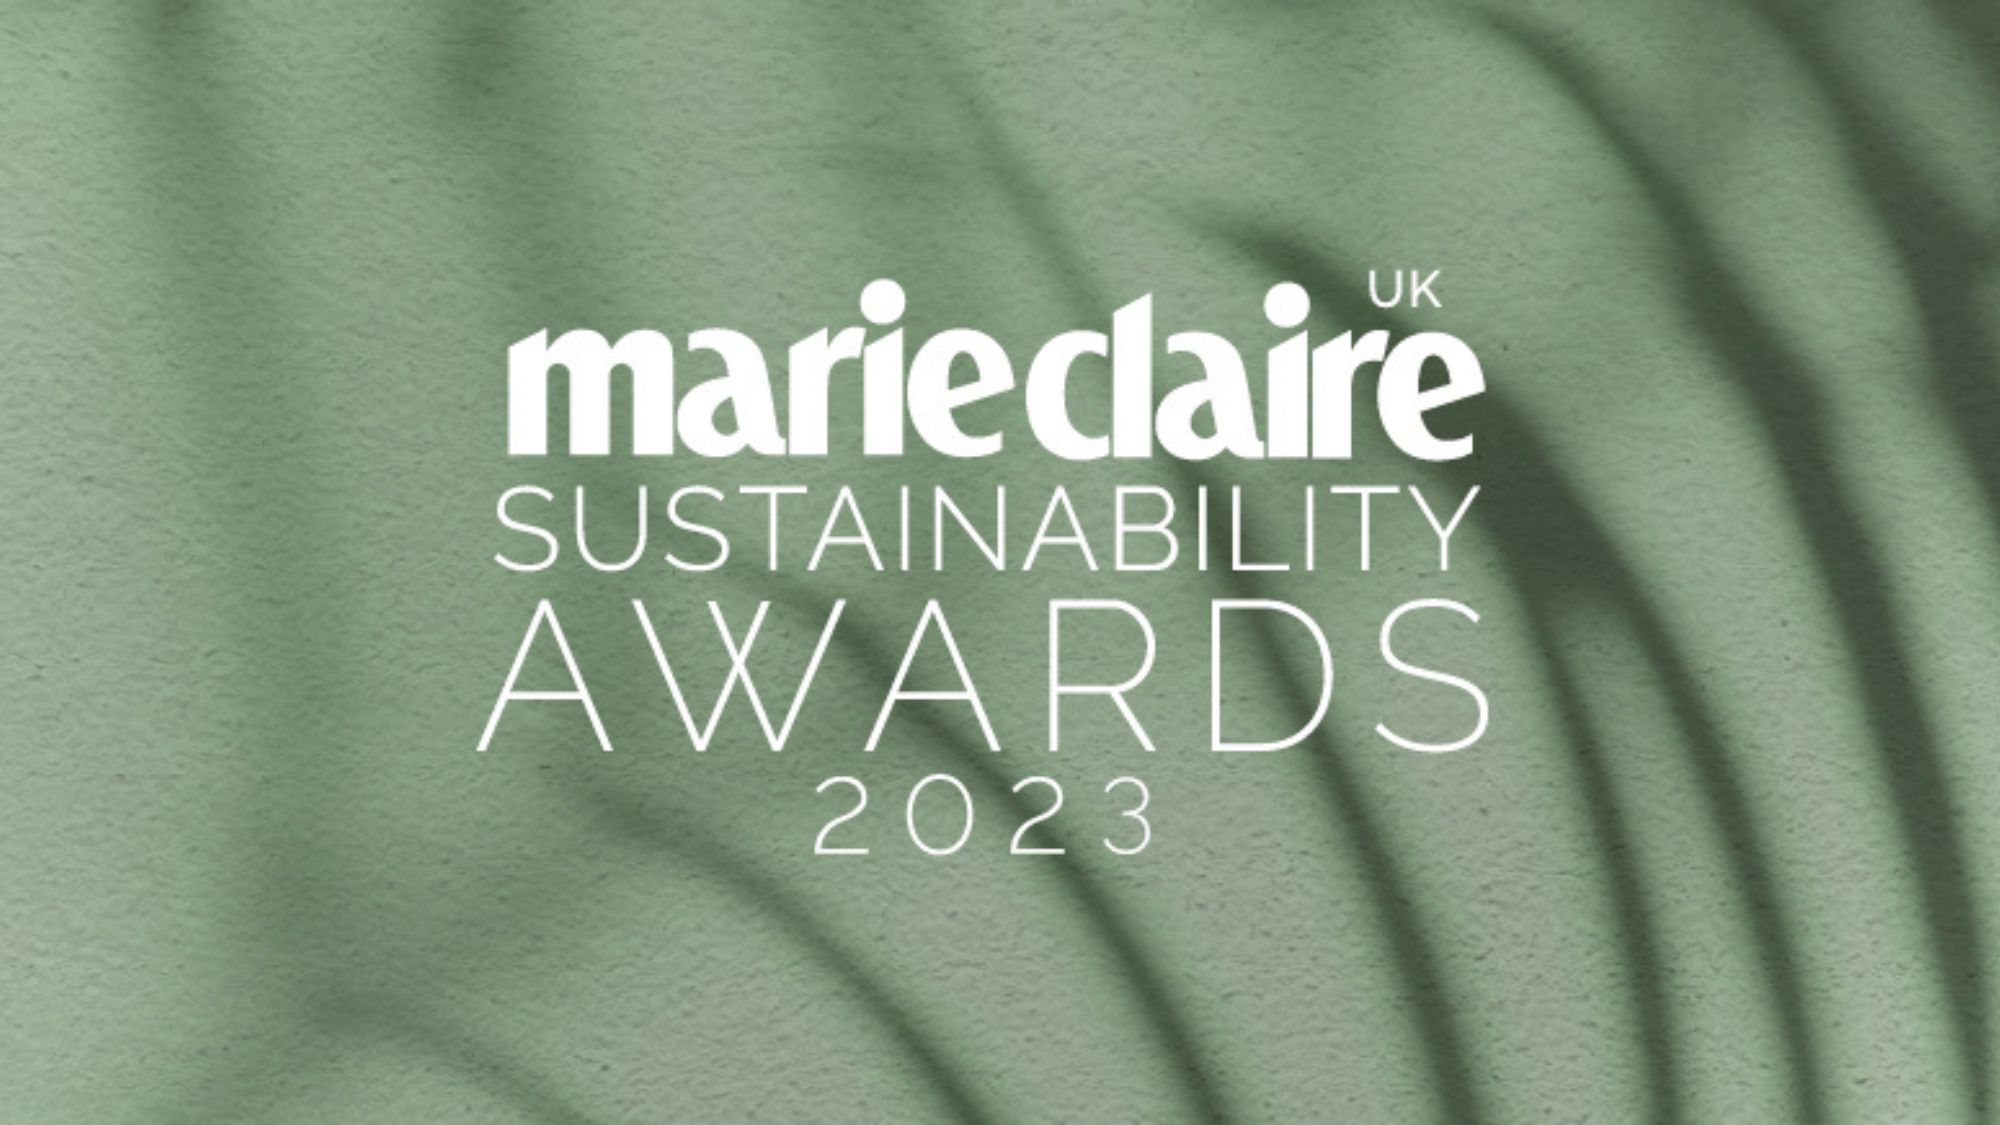 Meet the Marie Claire Sustainability Awards judges for 2023